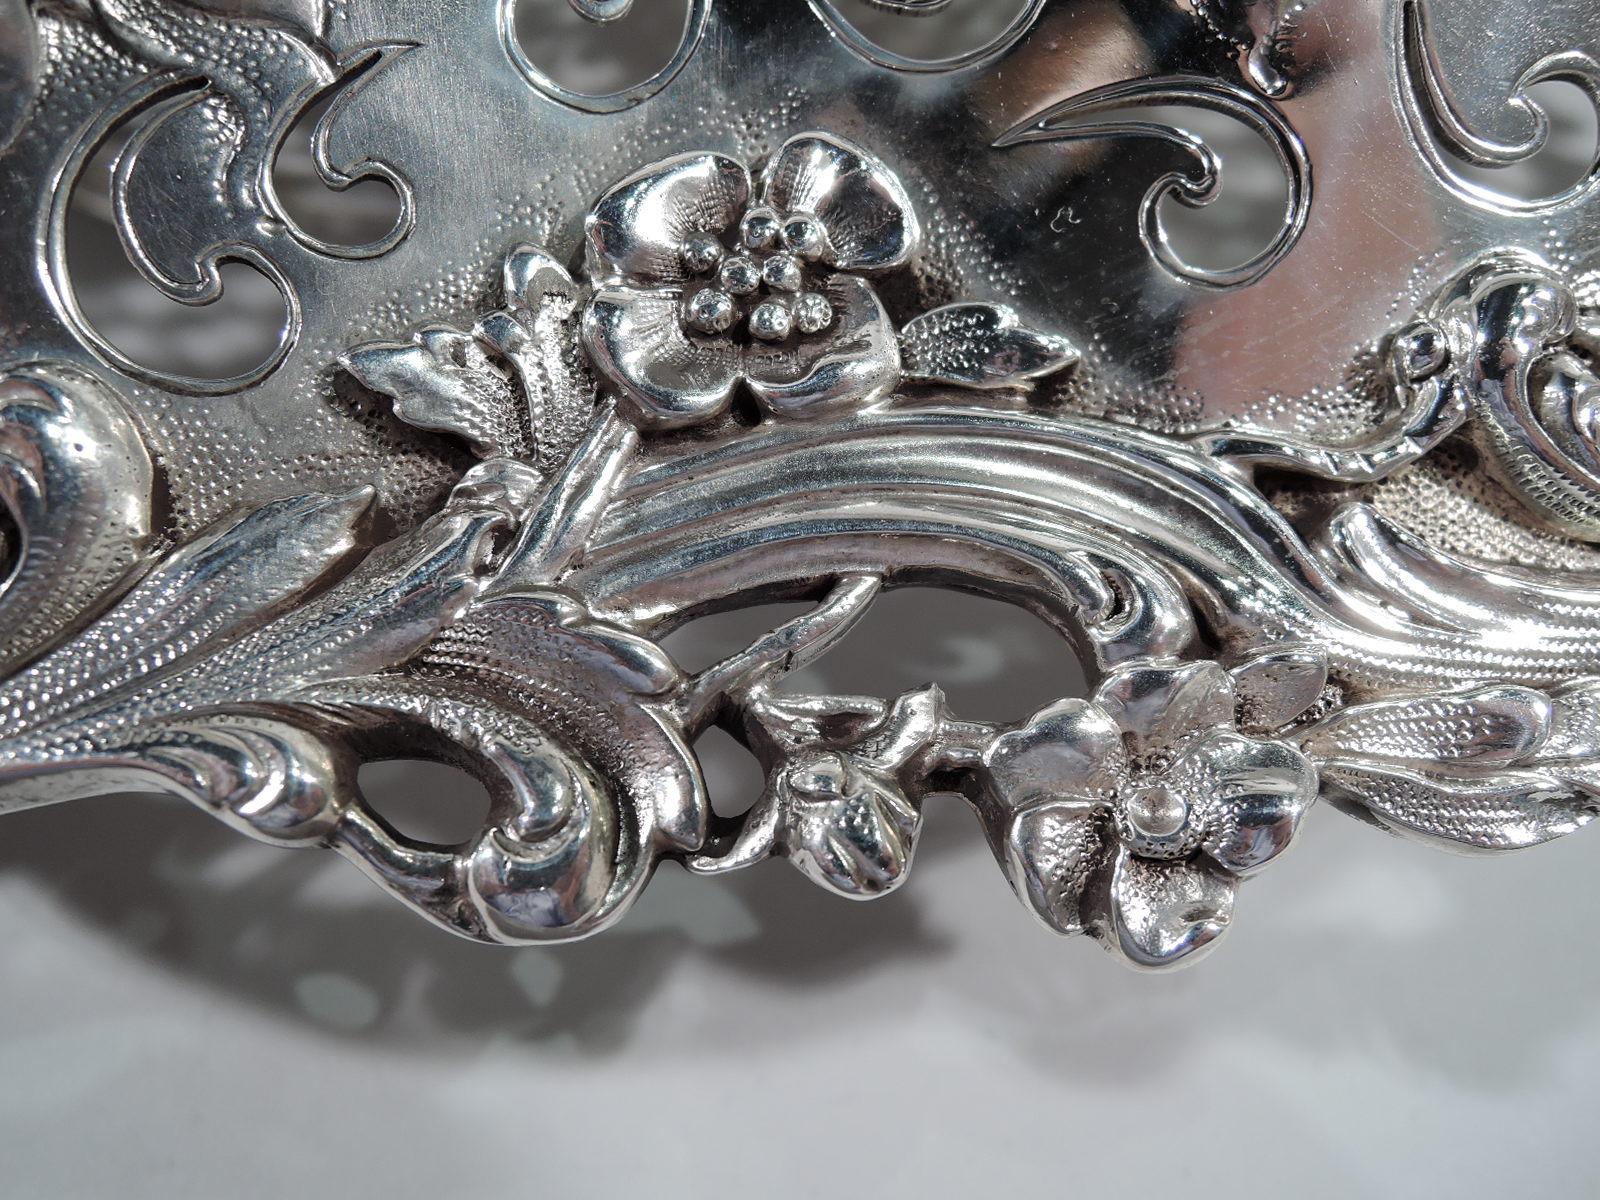 19th Century Gilded Age Sumptuous Sterling Silver Centerpiece Bowl by Tiffany & co.